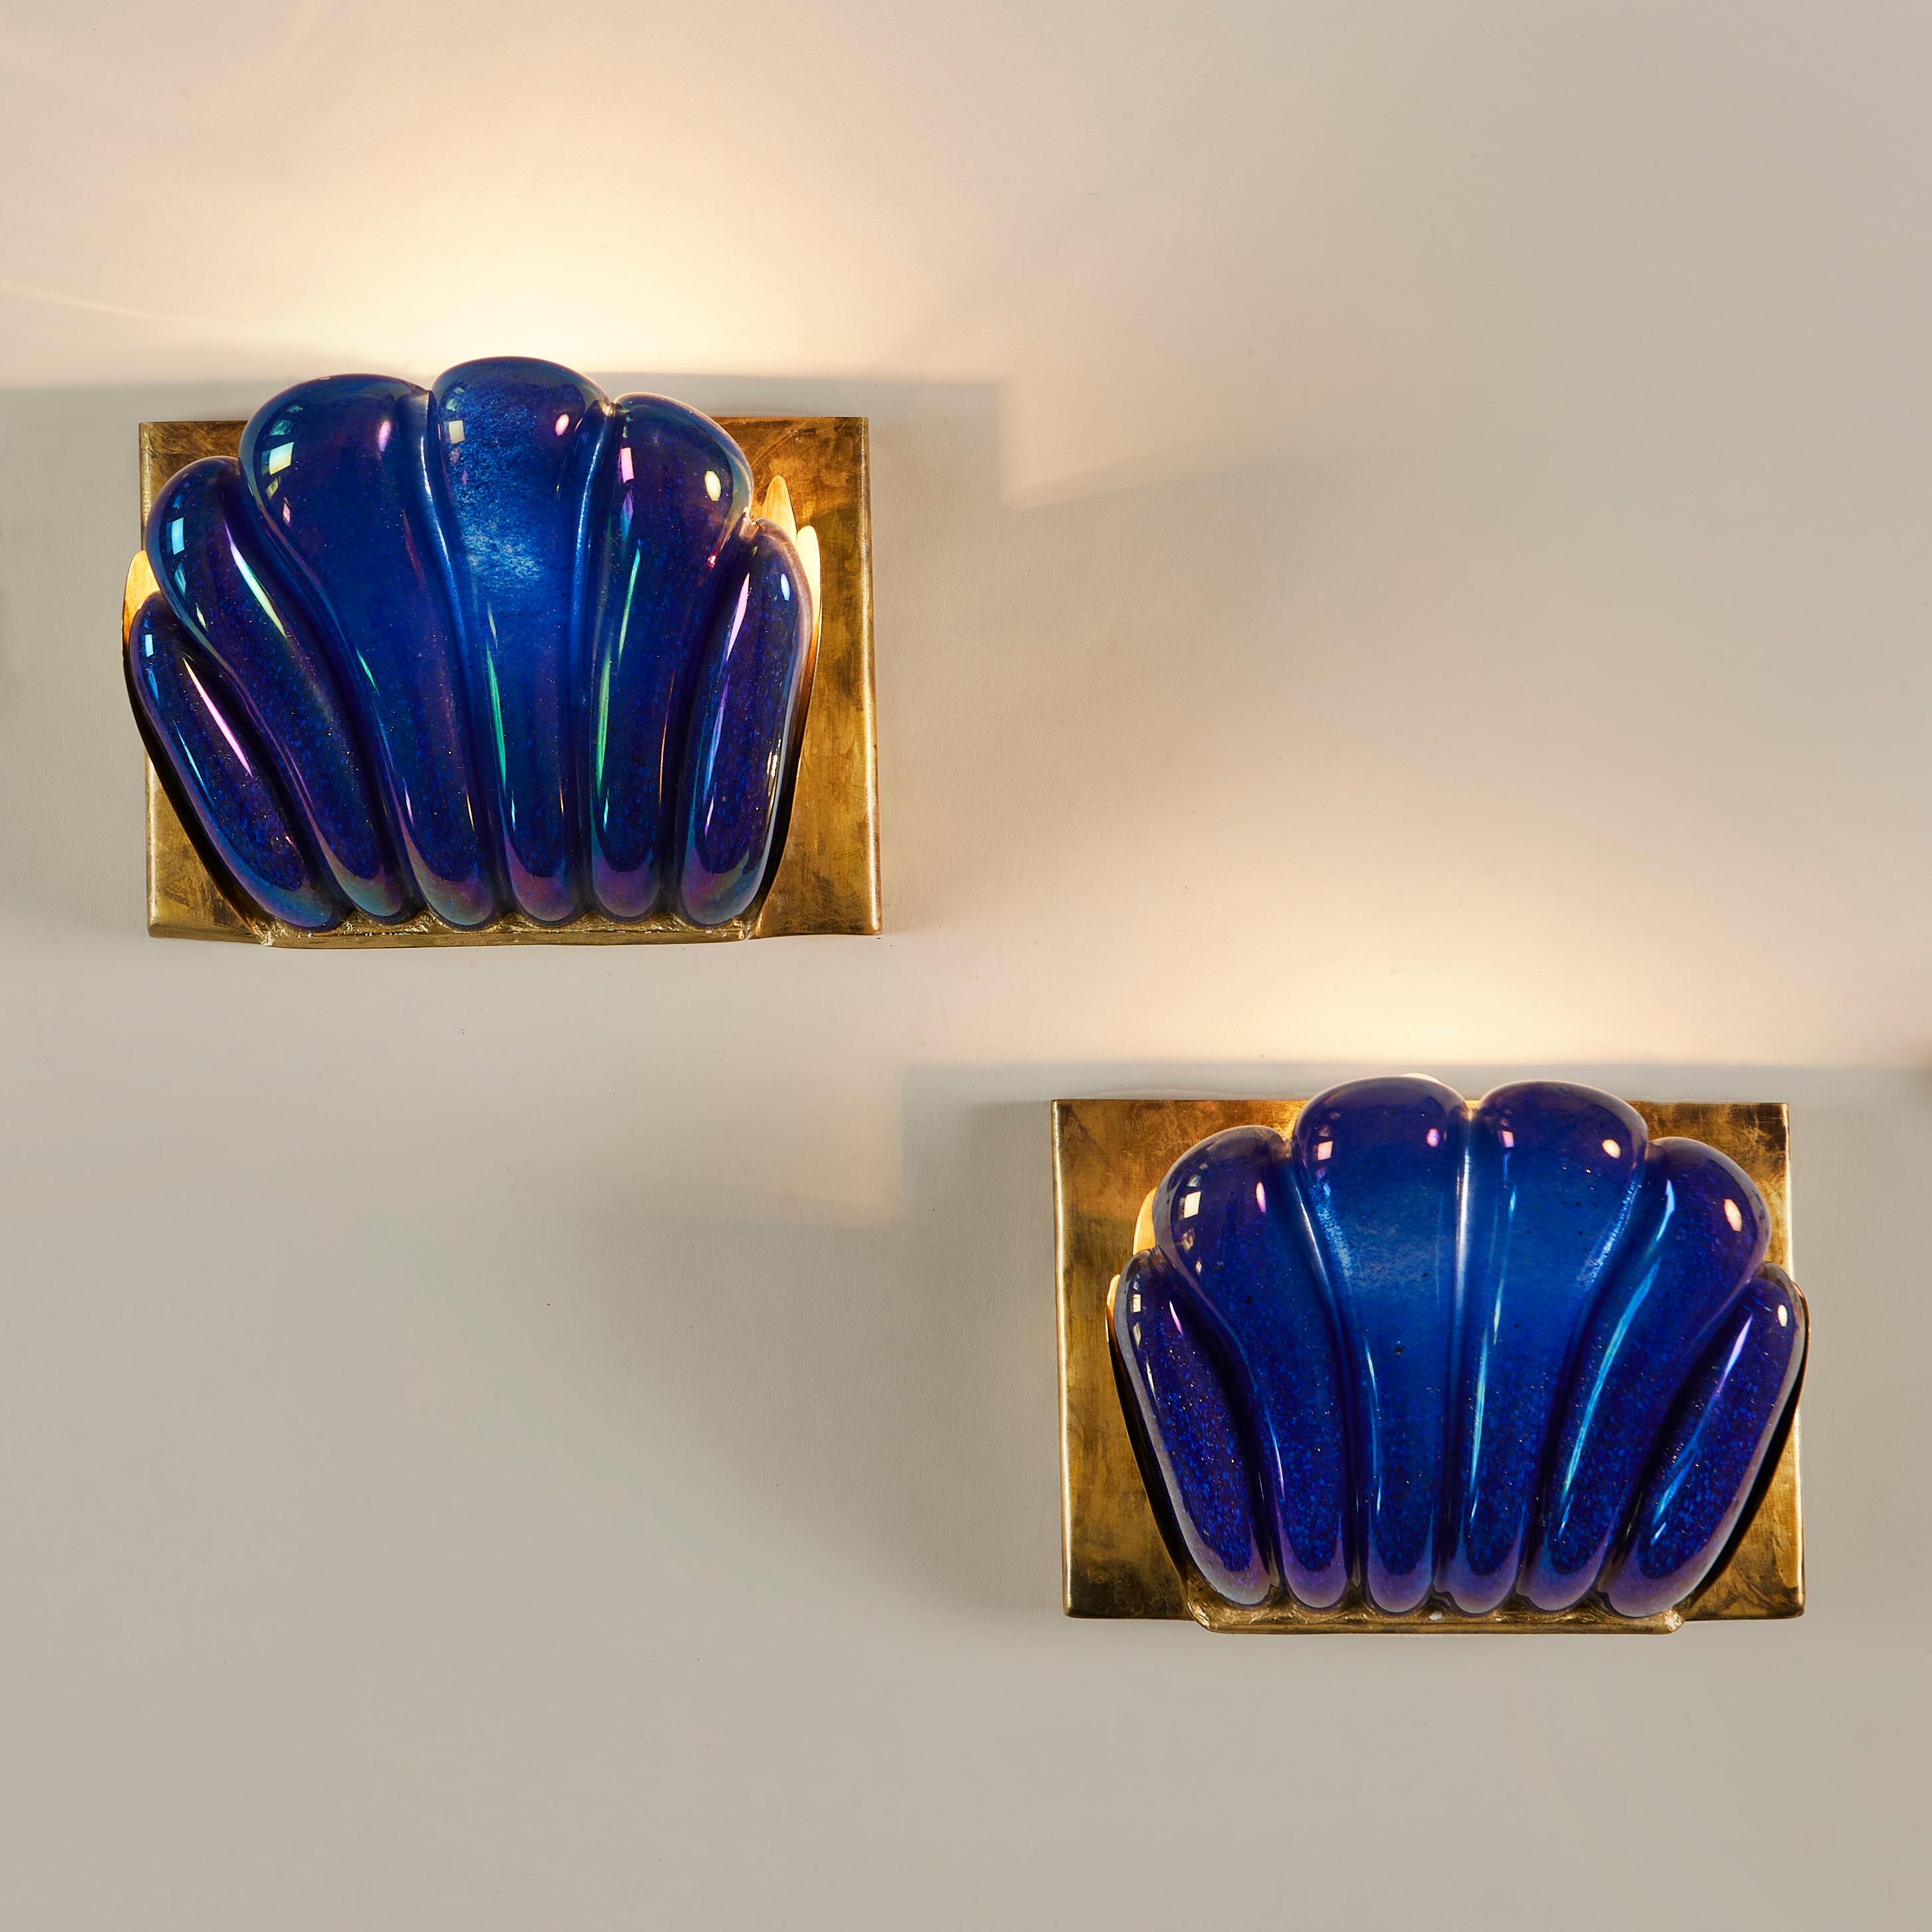 Thick smooth and generously scalloped Murano glass in rich iridescent Egyptian blue. Sits on brass backplate. Perfect mood lighting. Marked 'Seguso Vetri D'Arte Murano'
